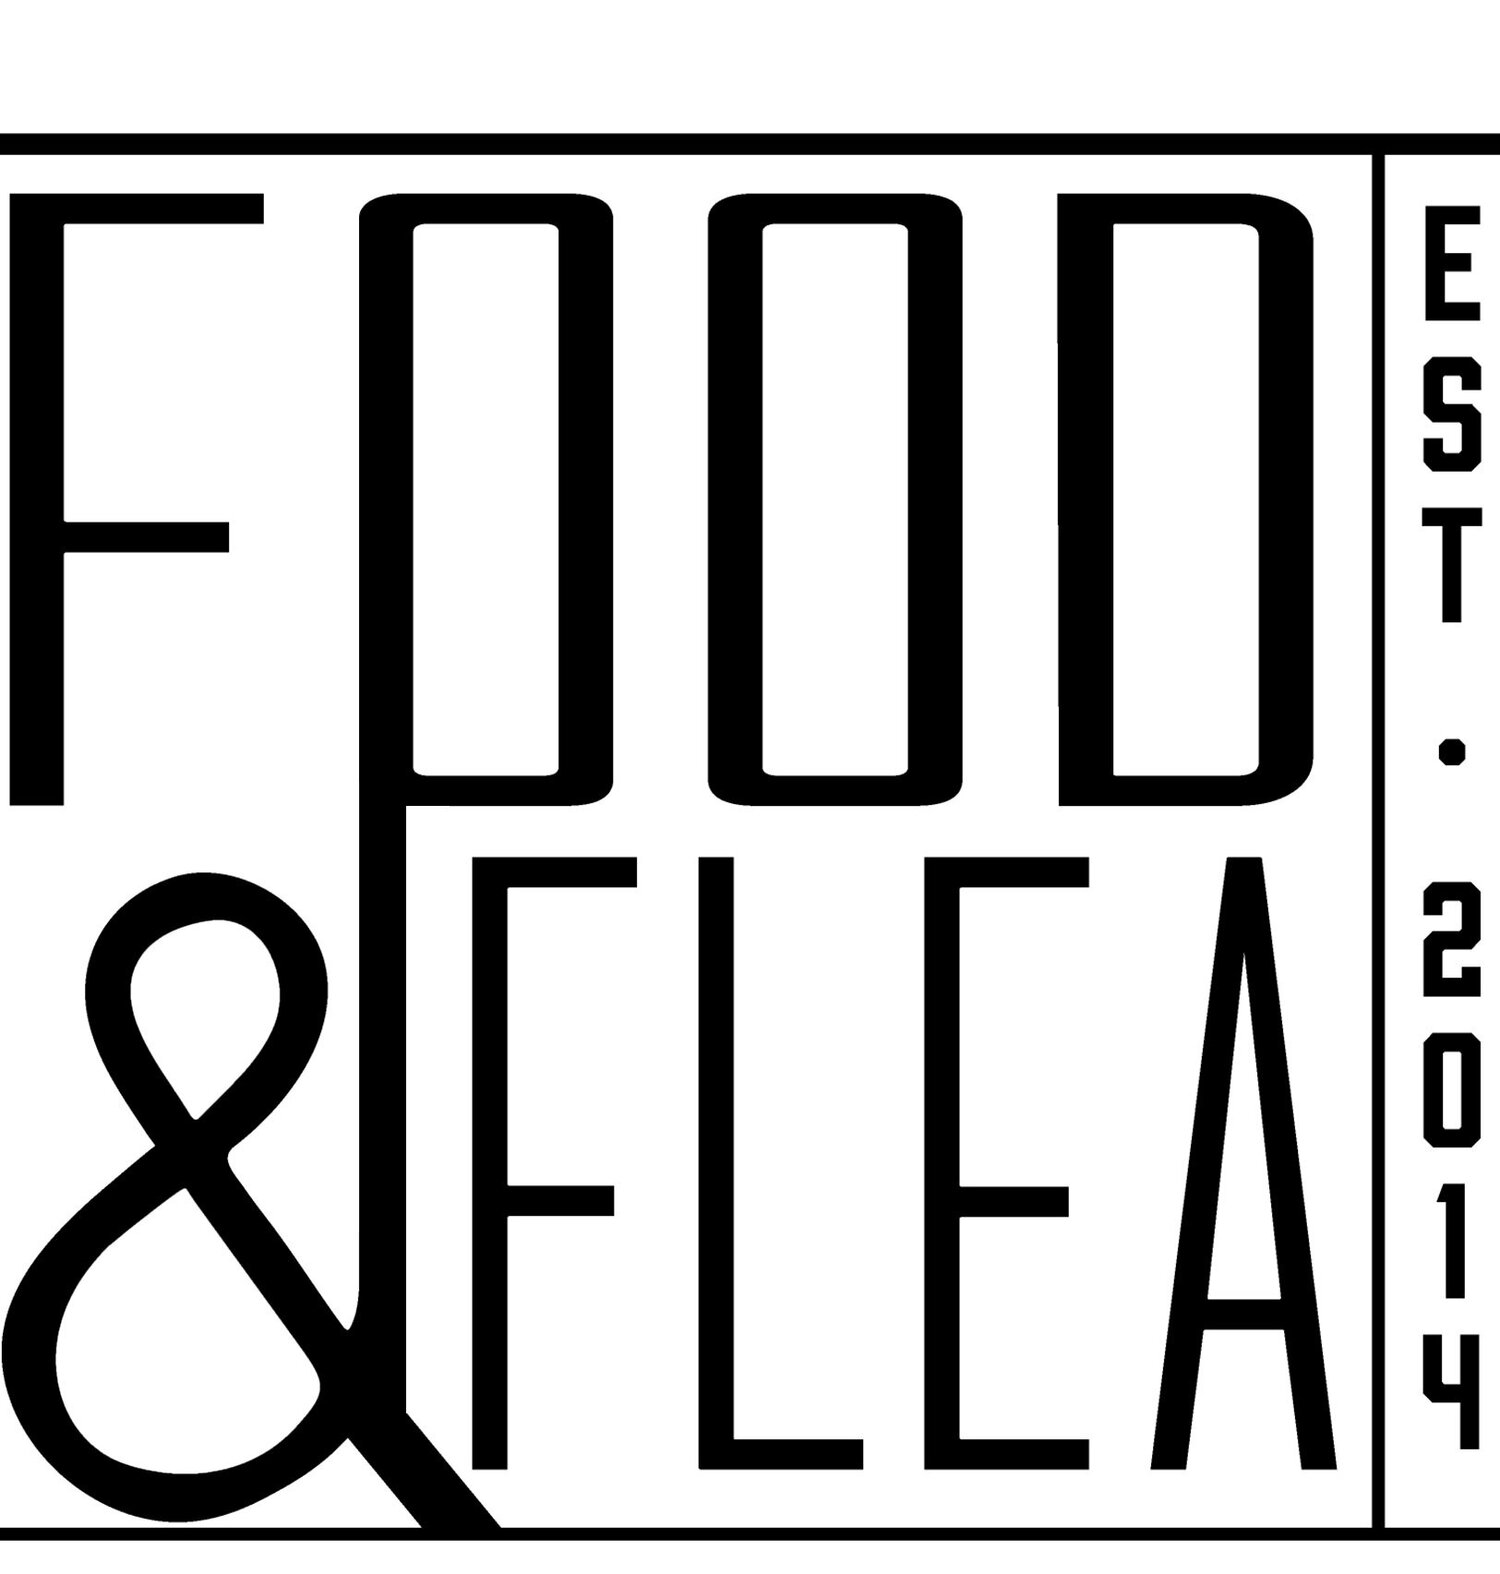 2019 Downtown Cary Food and Flea Market